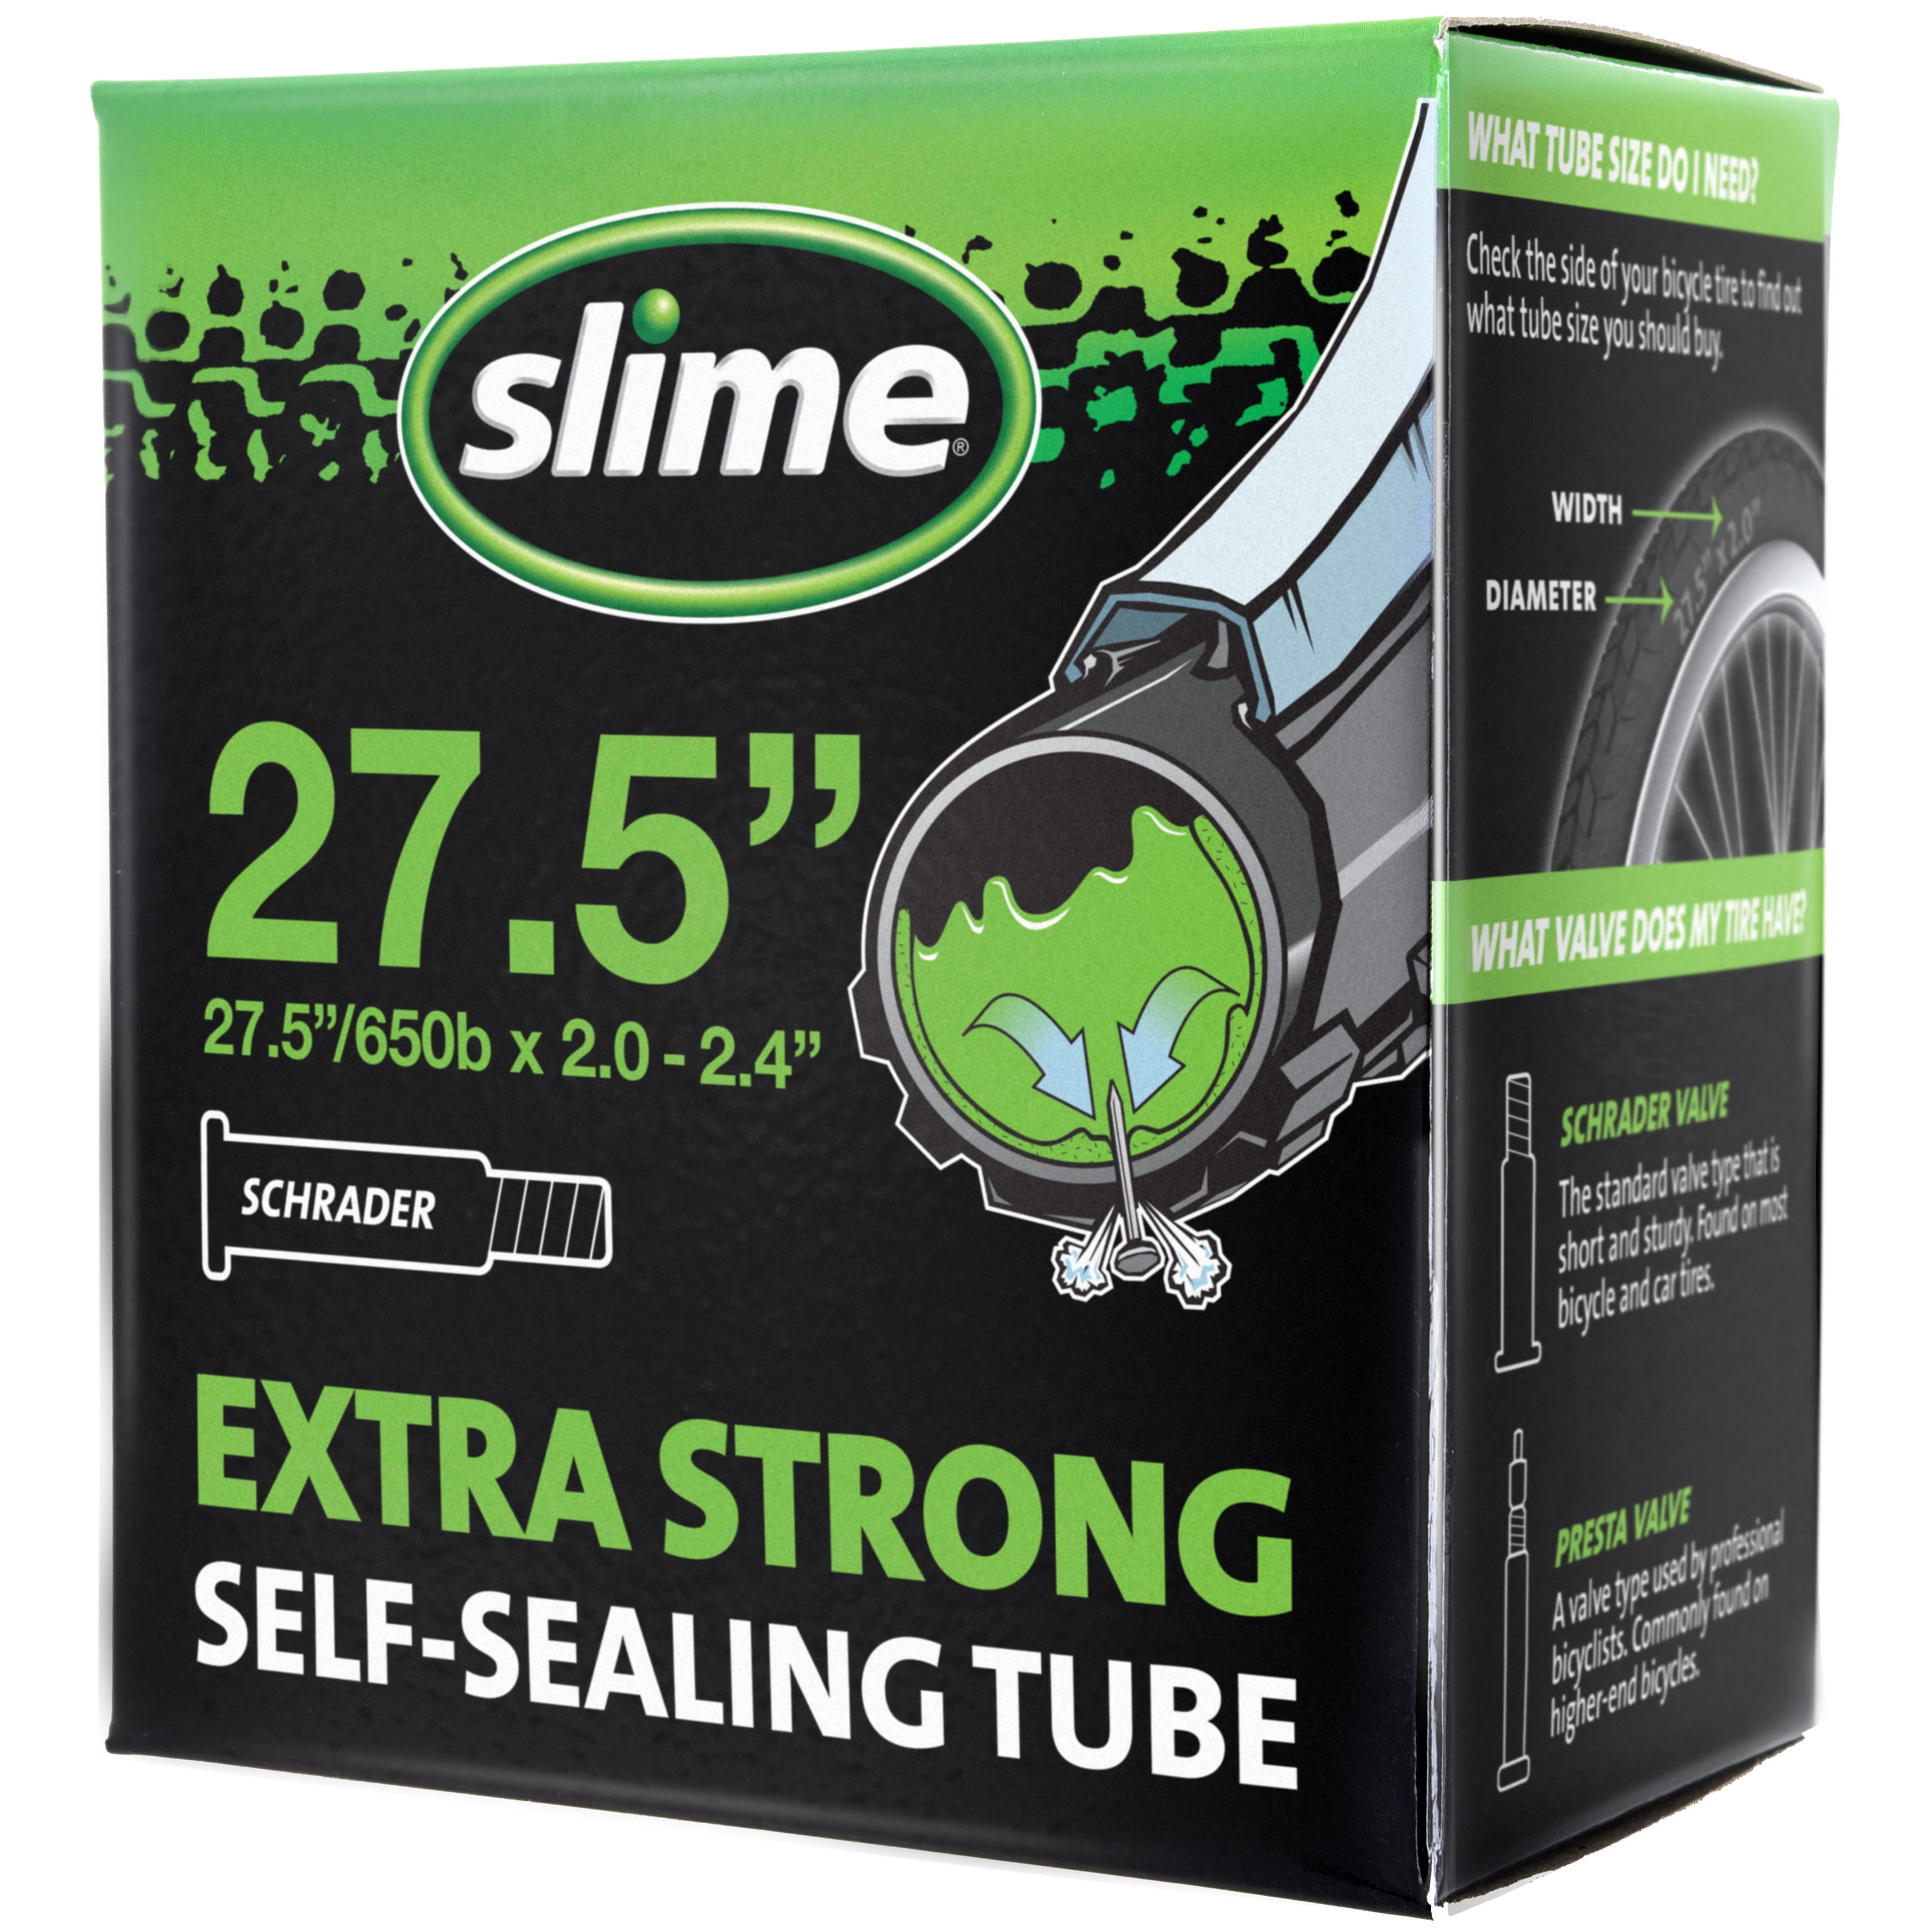 Slime Extra Strong Self-Sealing Bicycle Tube Schrader 27.5" x 2.0-2.40" - 30088